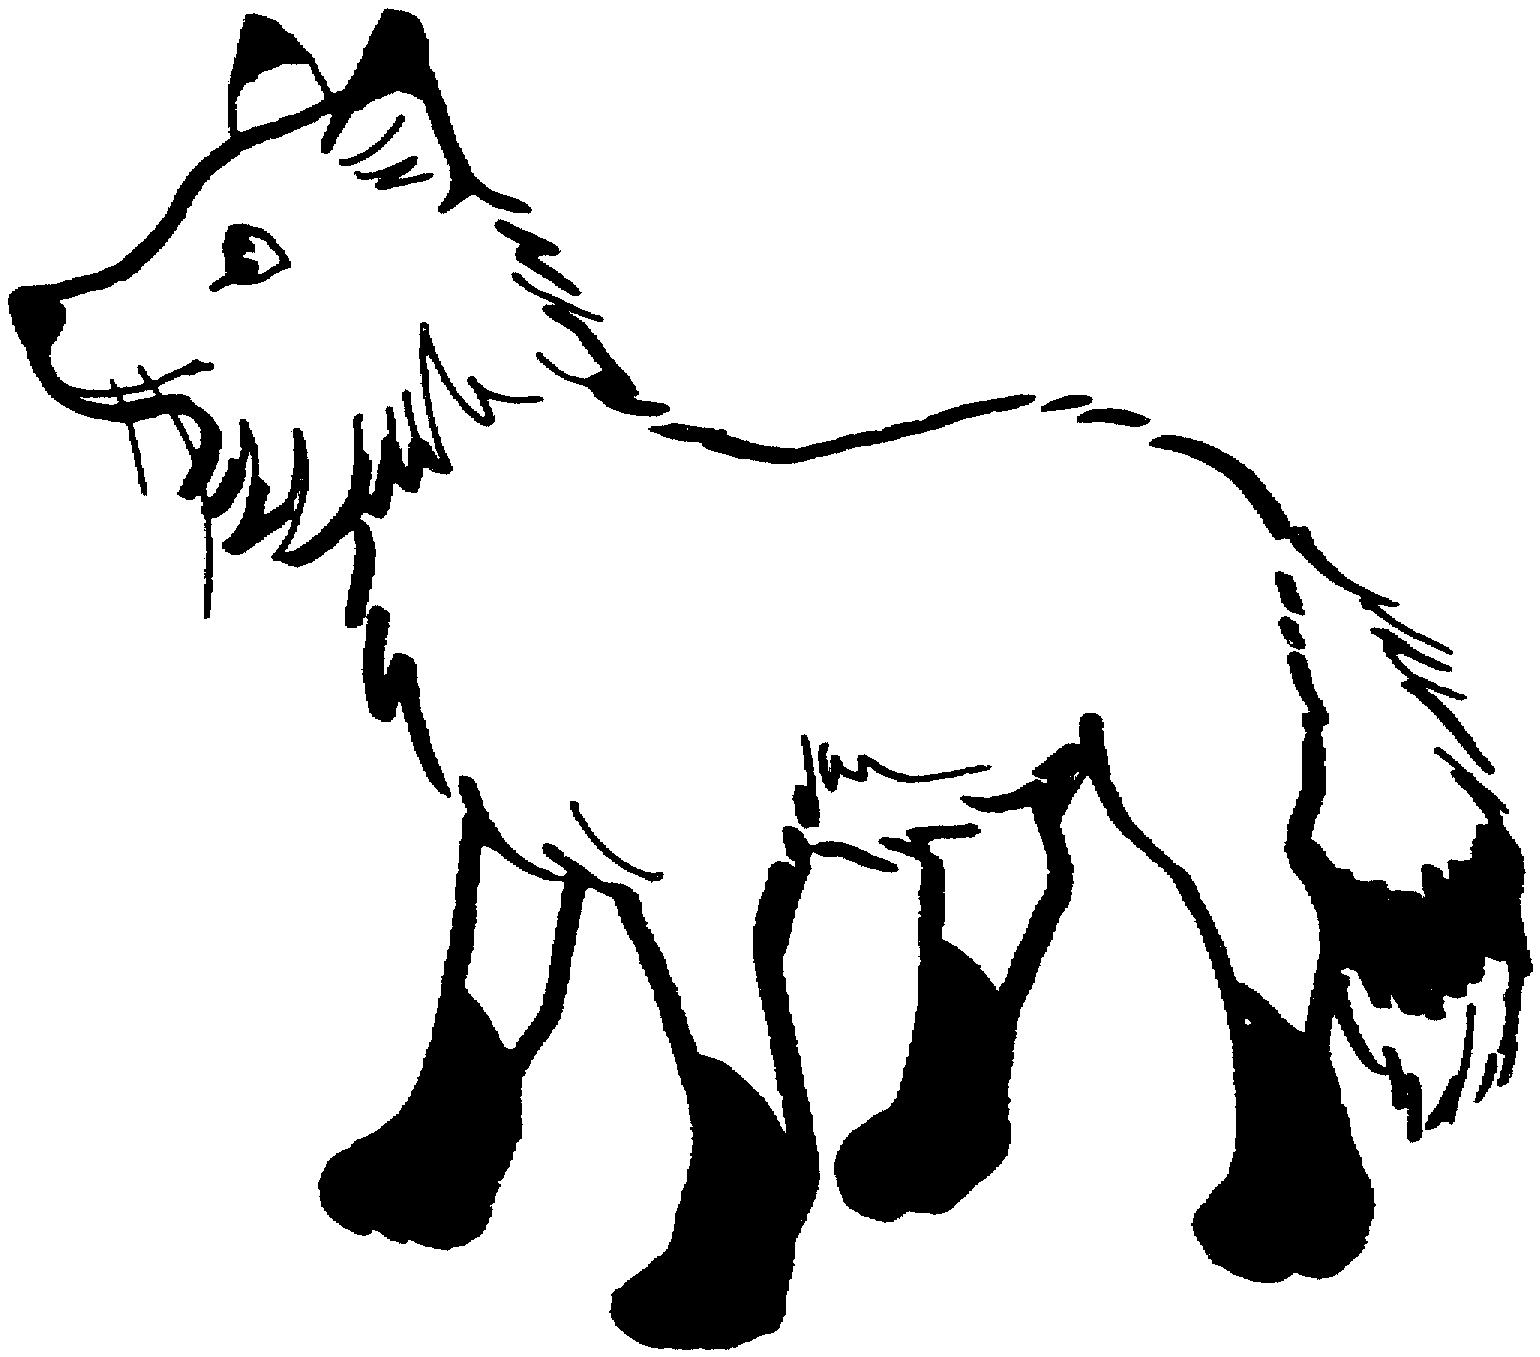 Simple Fox Coloring Page